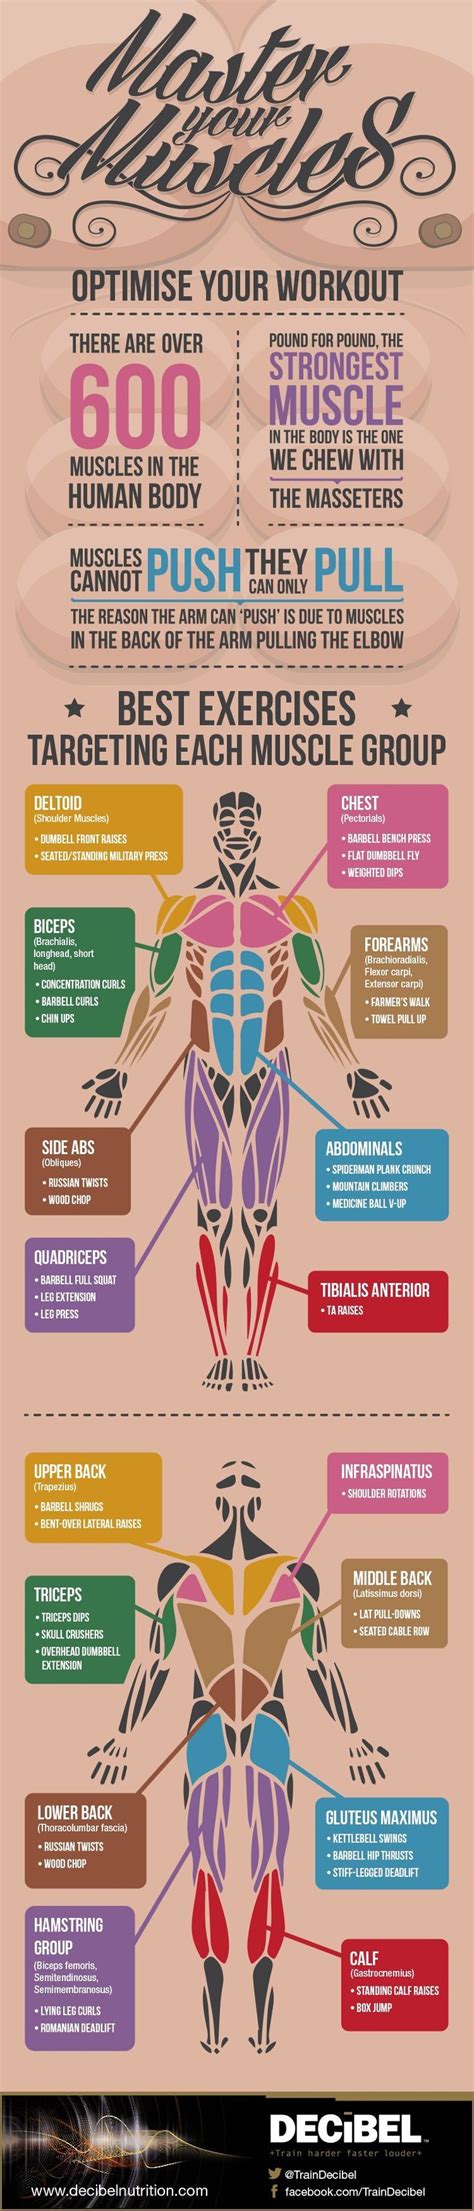 Muscles are all made of the same material, a type of elastic tissue (sort of like the material in a rubber band). The 25+ best Body muscles names ideas on Pinterest | Muscle names, Muscle anatomy and Human ...